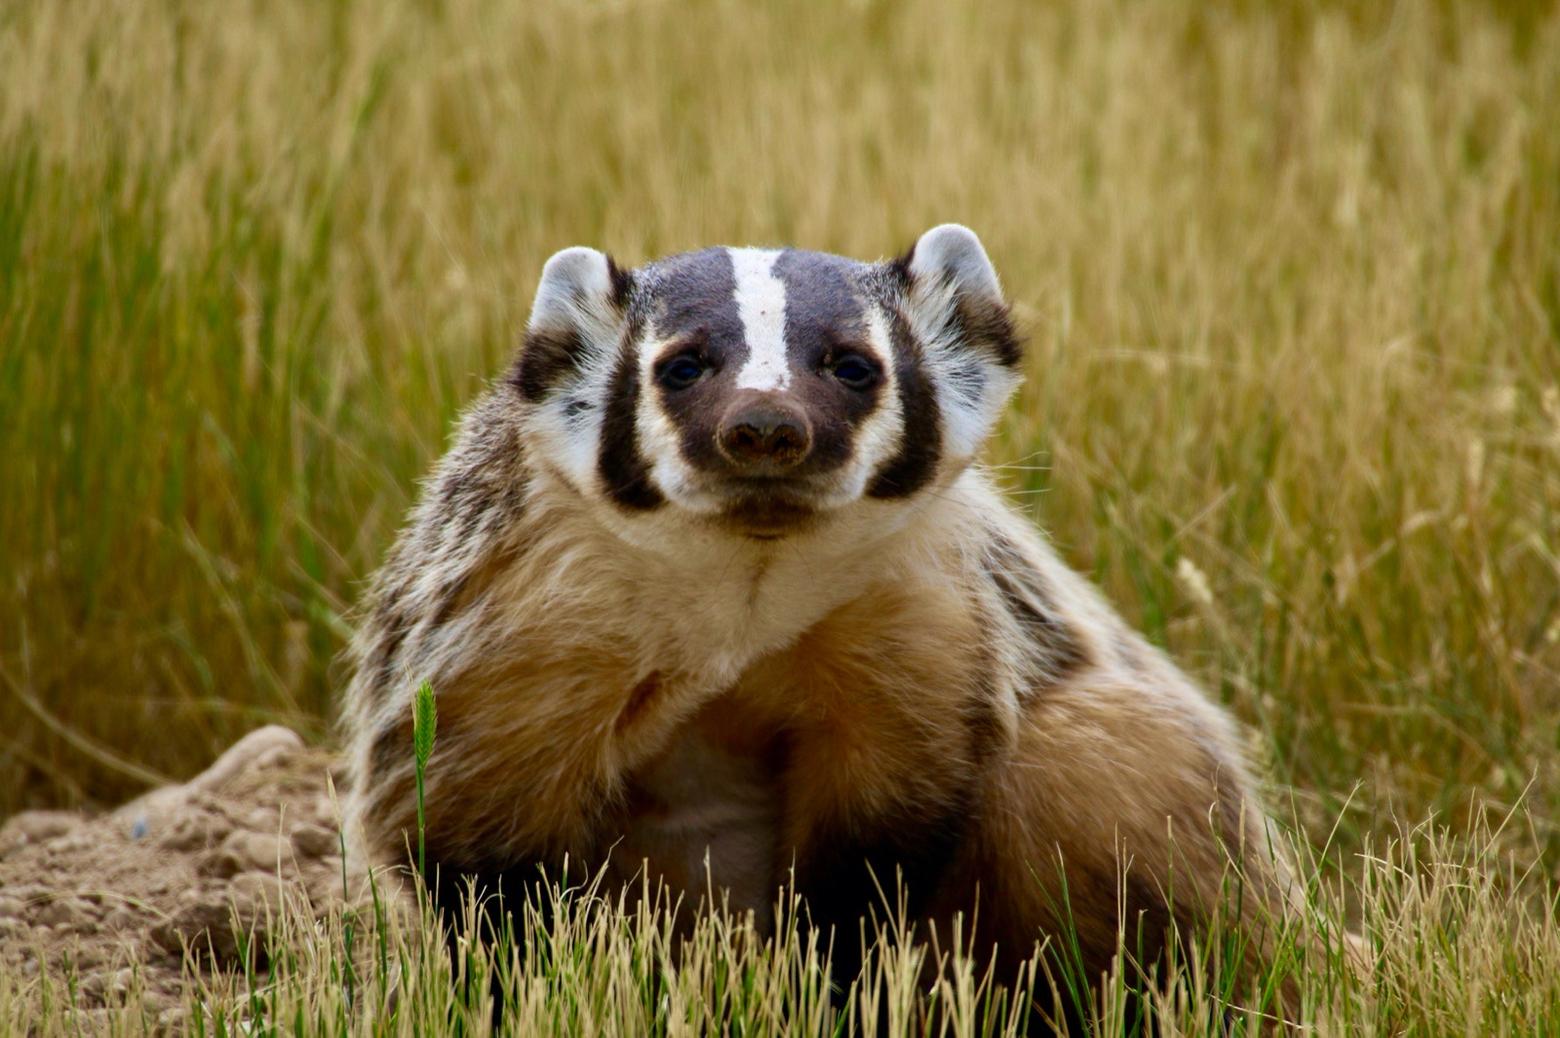 Animals figure prominently into indigenous oral traditions, older and as deeply engrained as the morality and survival stories of the gods in Greek and Roman mythology and which were part of the foundation of Western Civilization.  Badger photo courtesy Kari Cieszkiewicz/US Fish and Wildlife Service